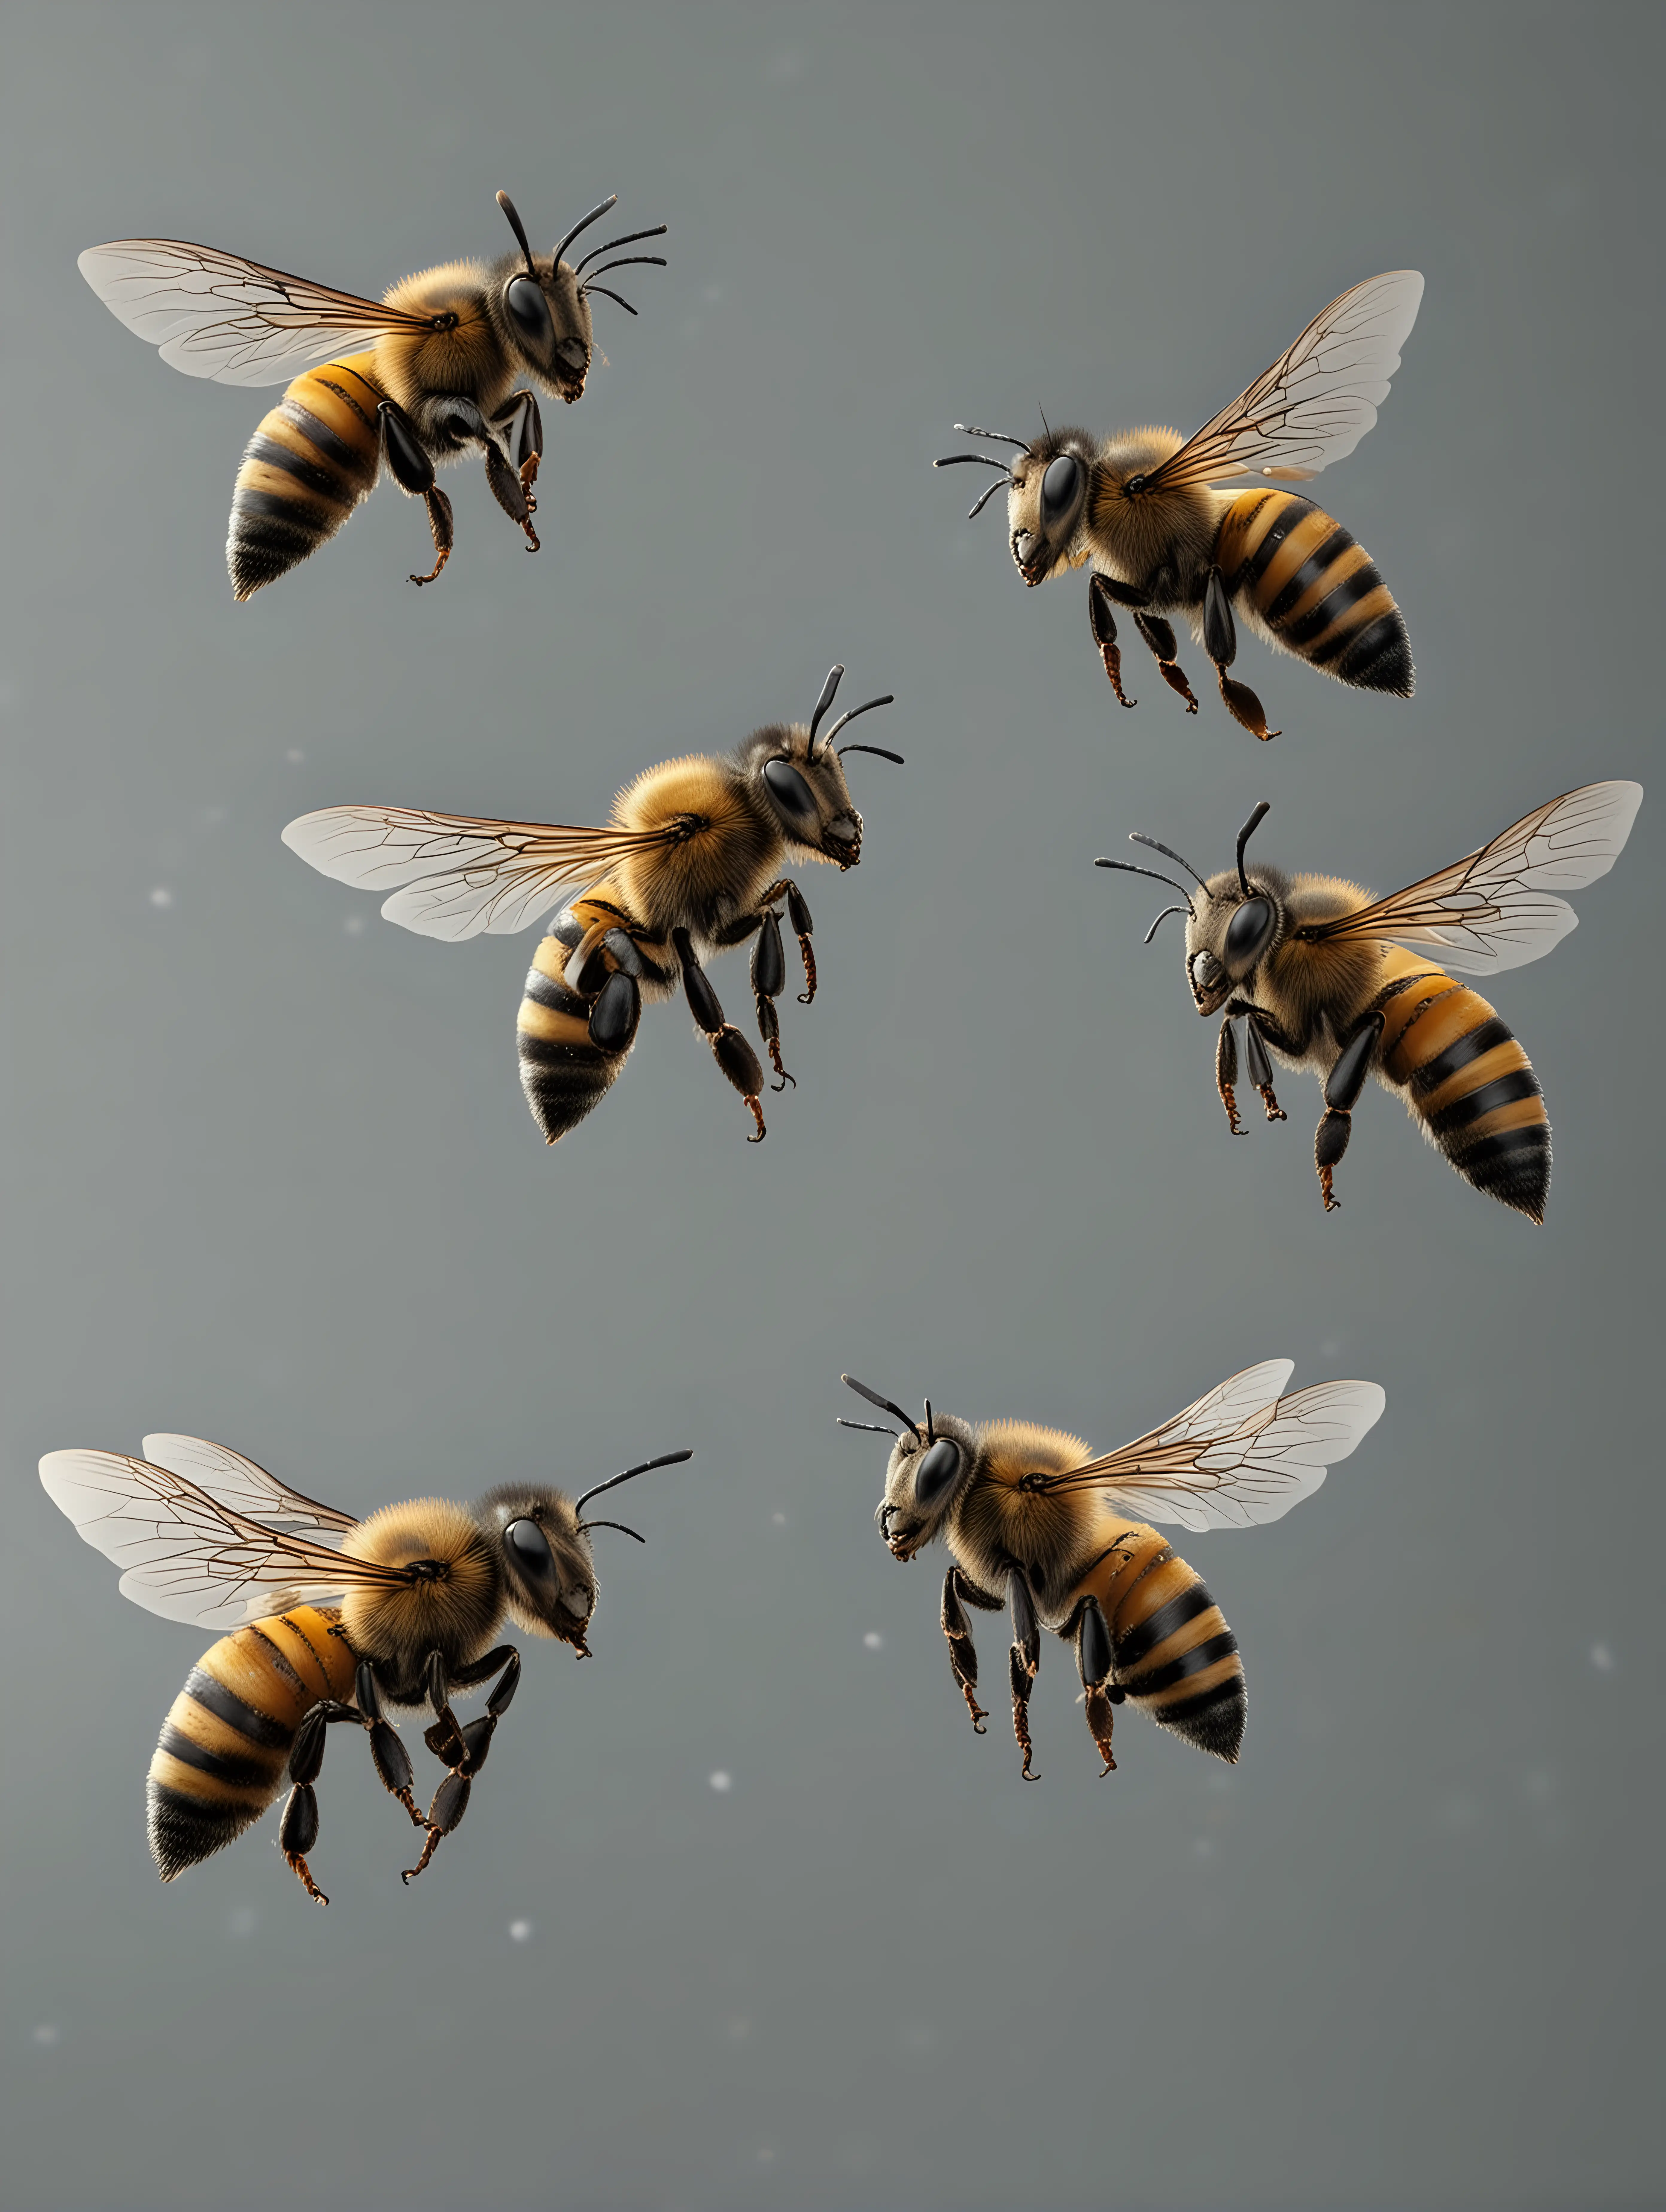 HyperRealistic Photorealistic Bees Flying on Neutral Gray Background